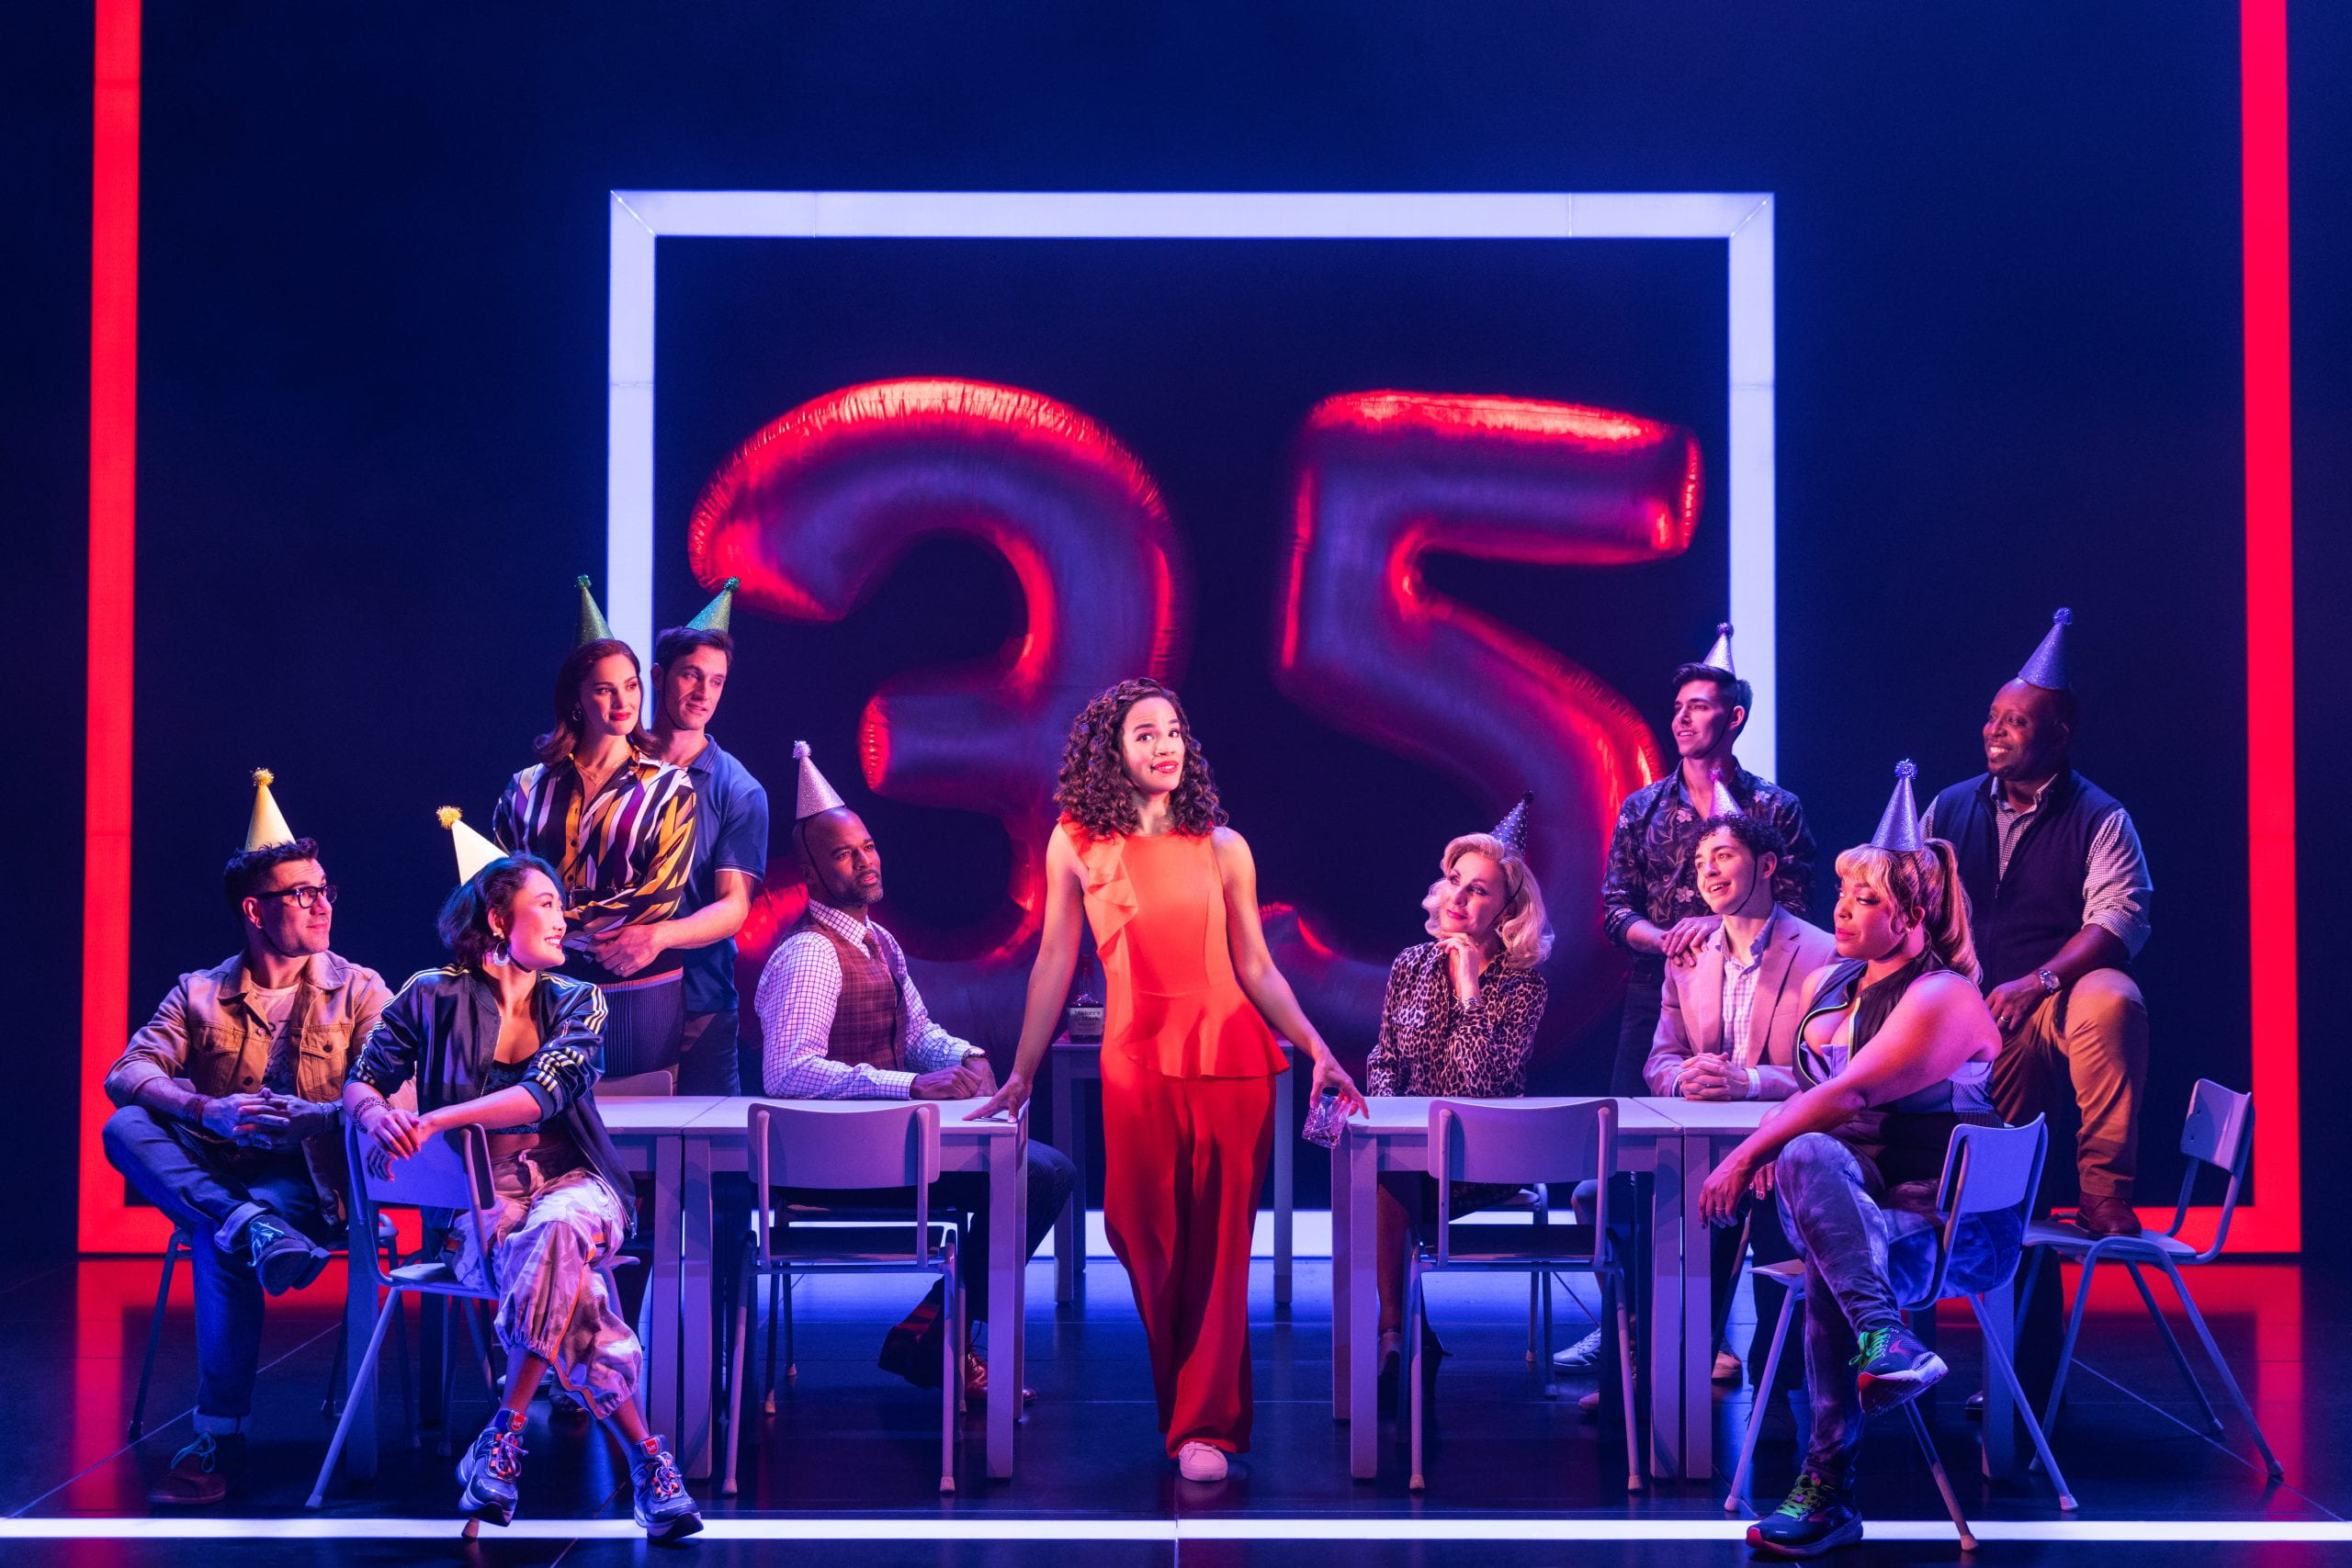 Led by Britney Coleman (center) as Bobbie, the current touring production of "Company" will stop at the Ohio Theatre from Tuesday to Sunday. Credit: Jim Fisher